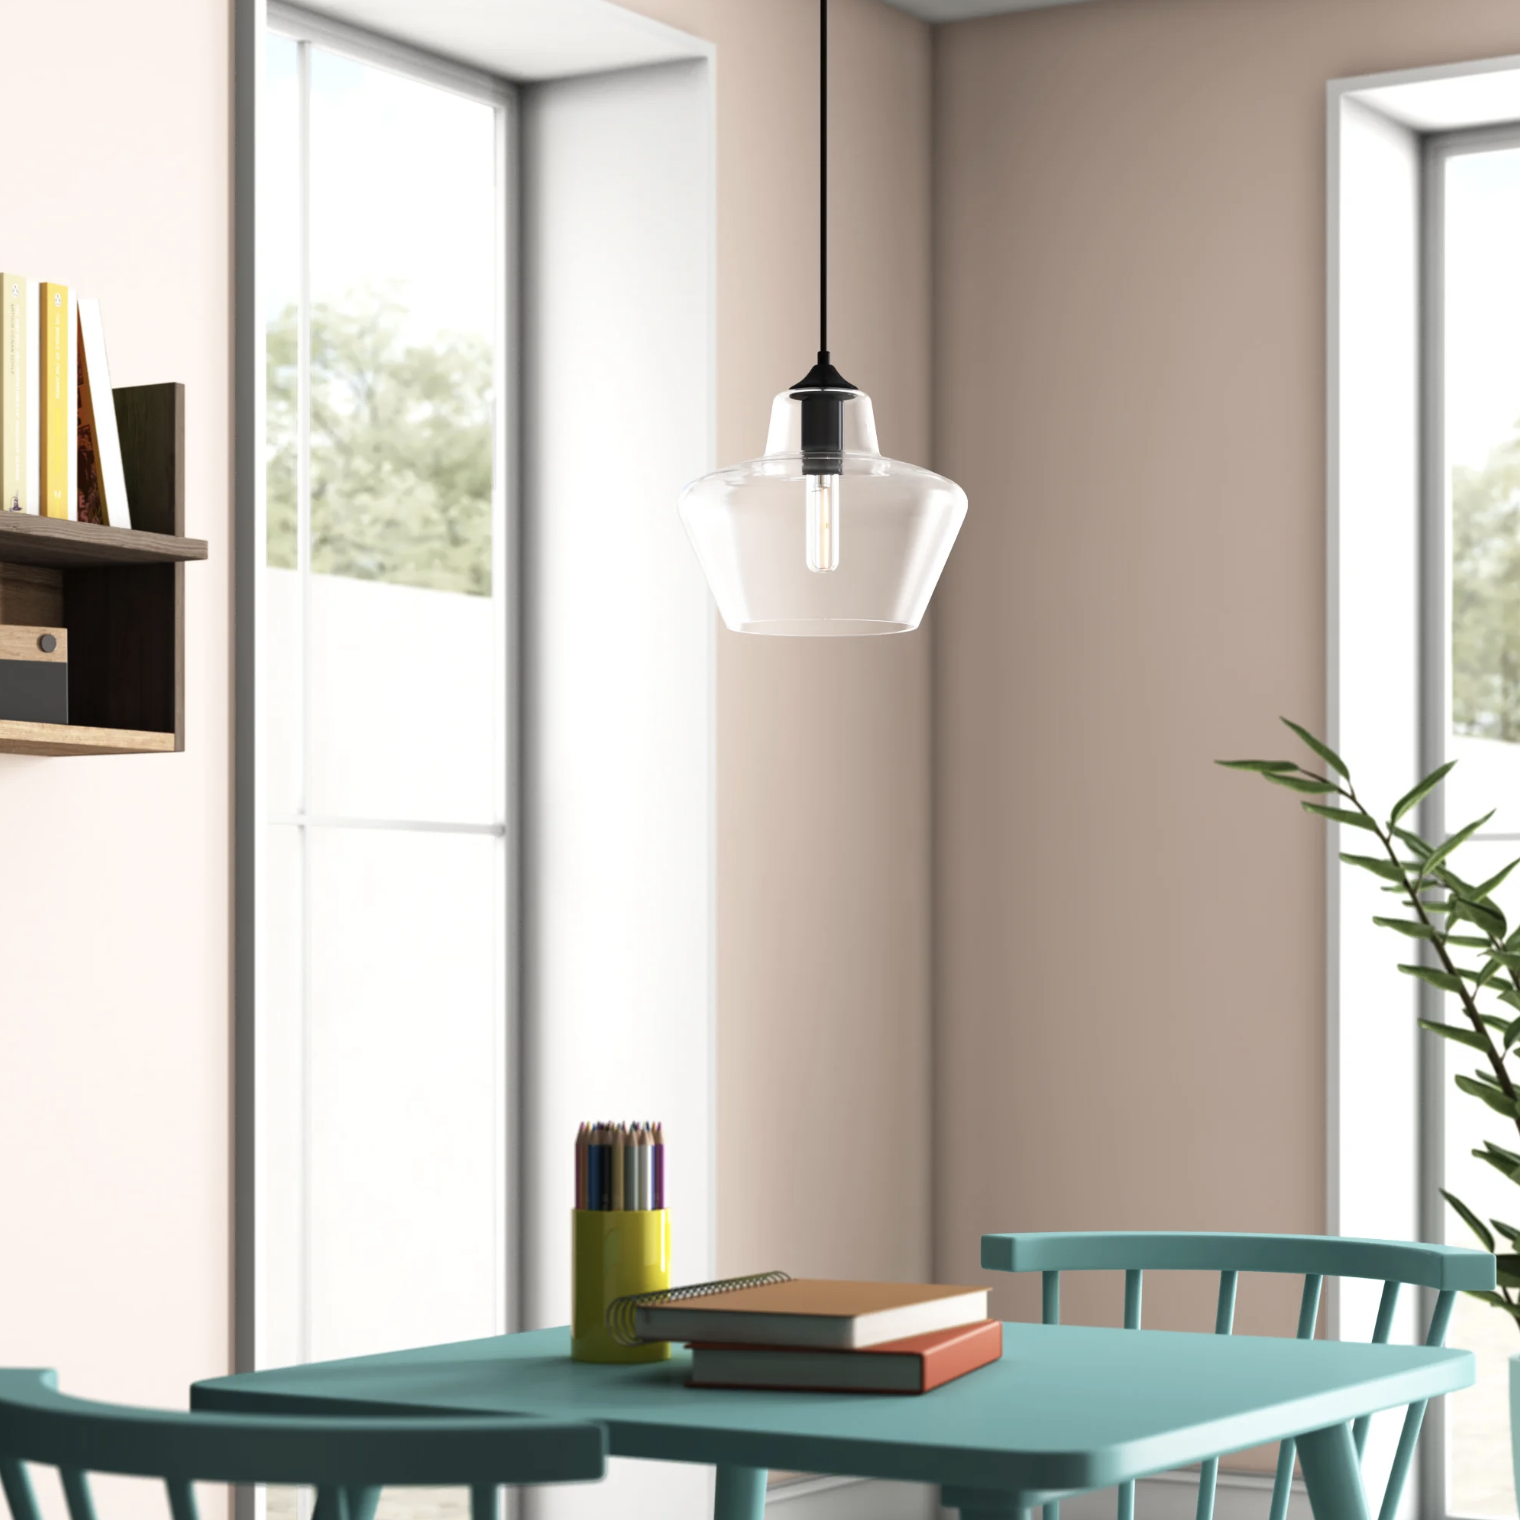 The pendant light hanging above a table